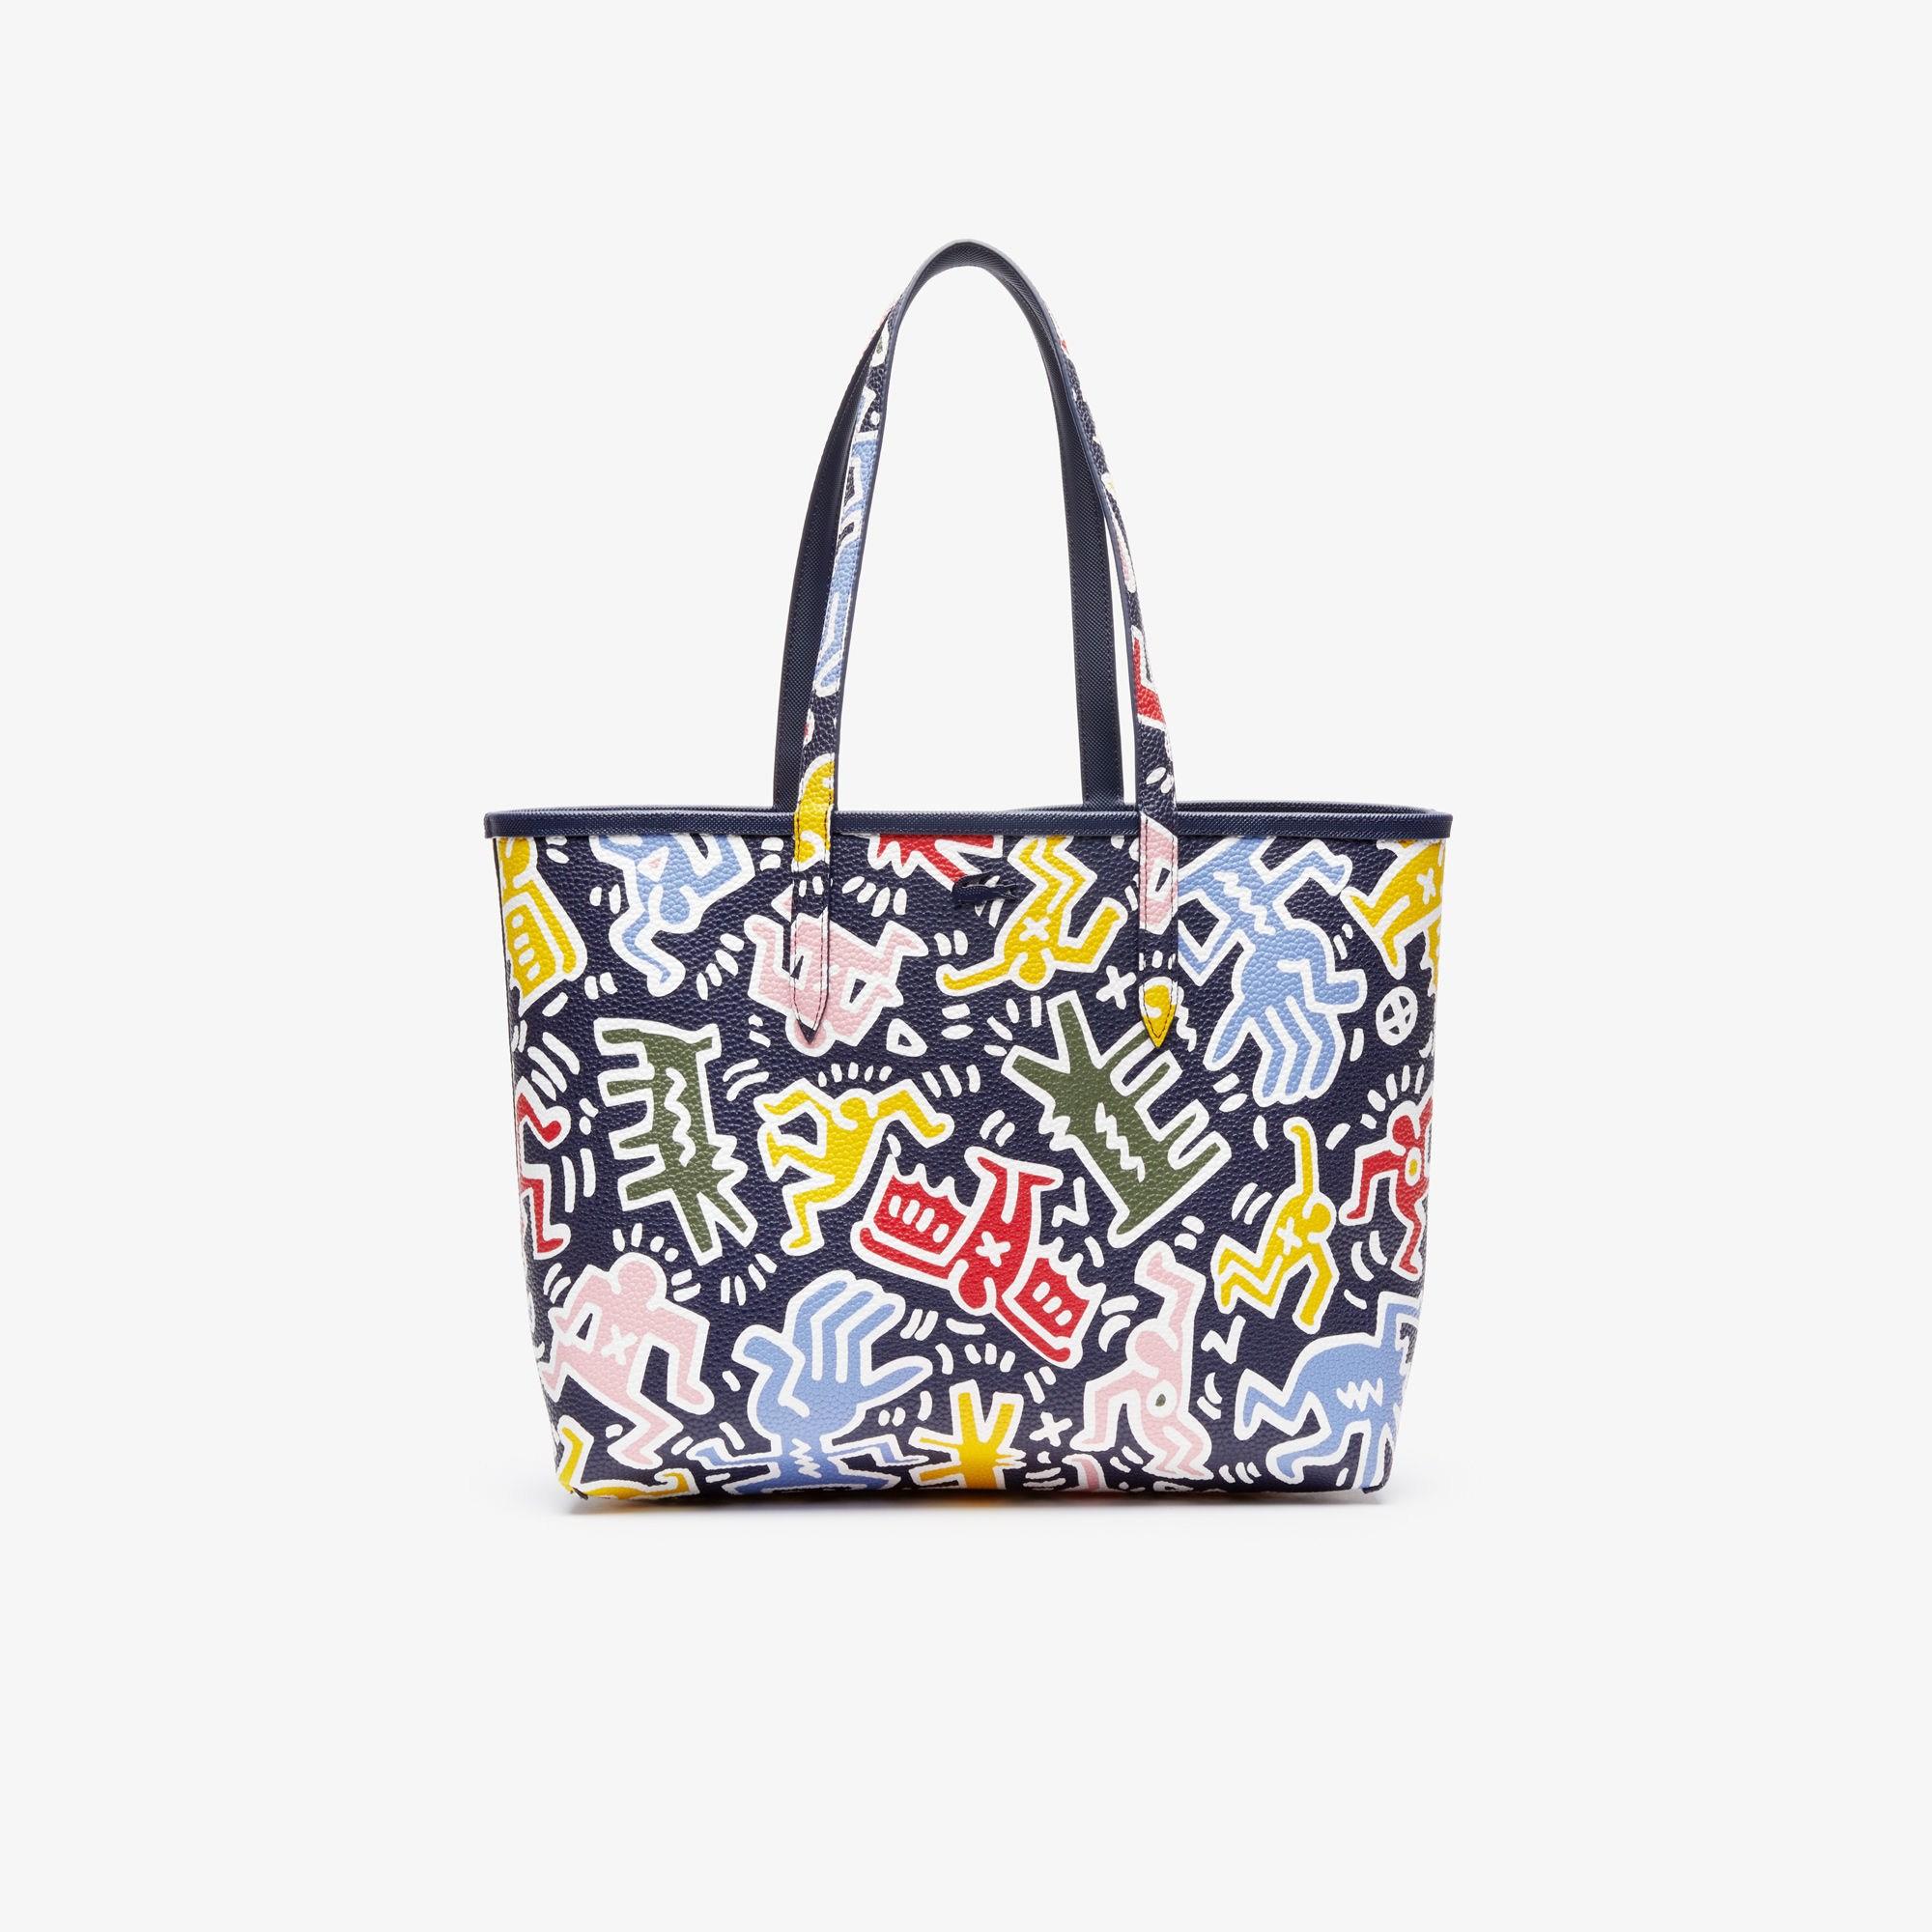 lacoste keith haring bag